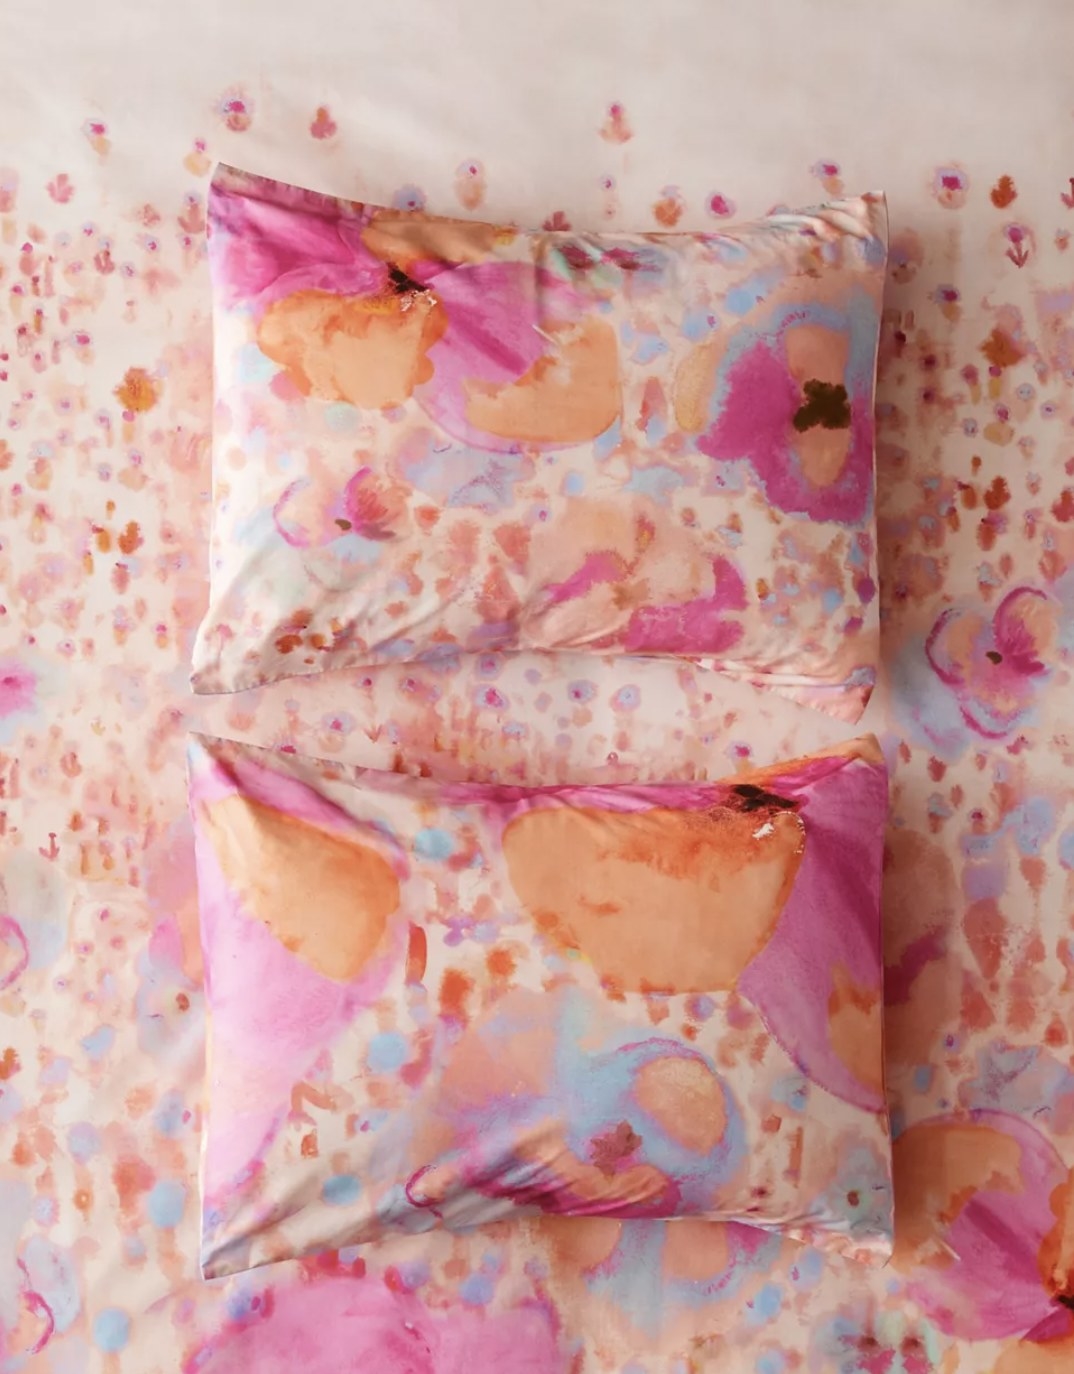 The pillow cases